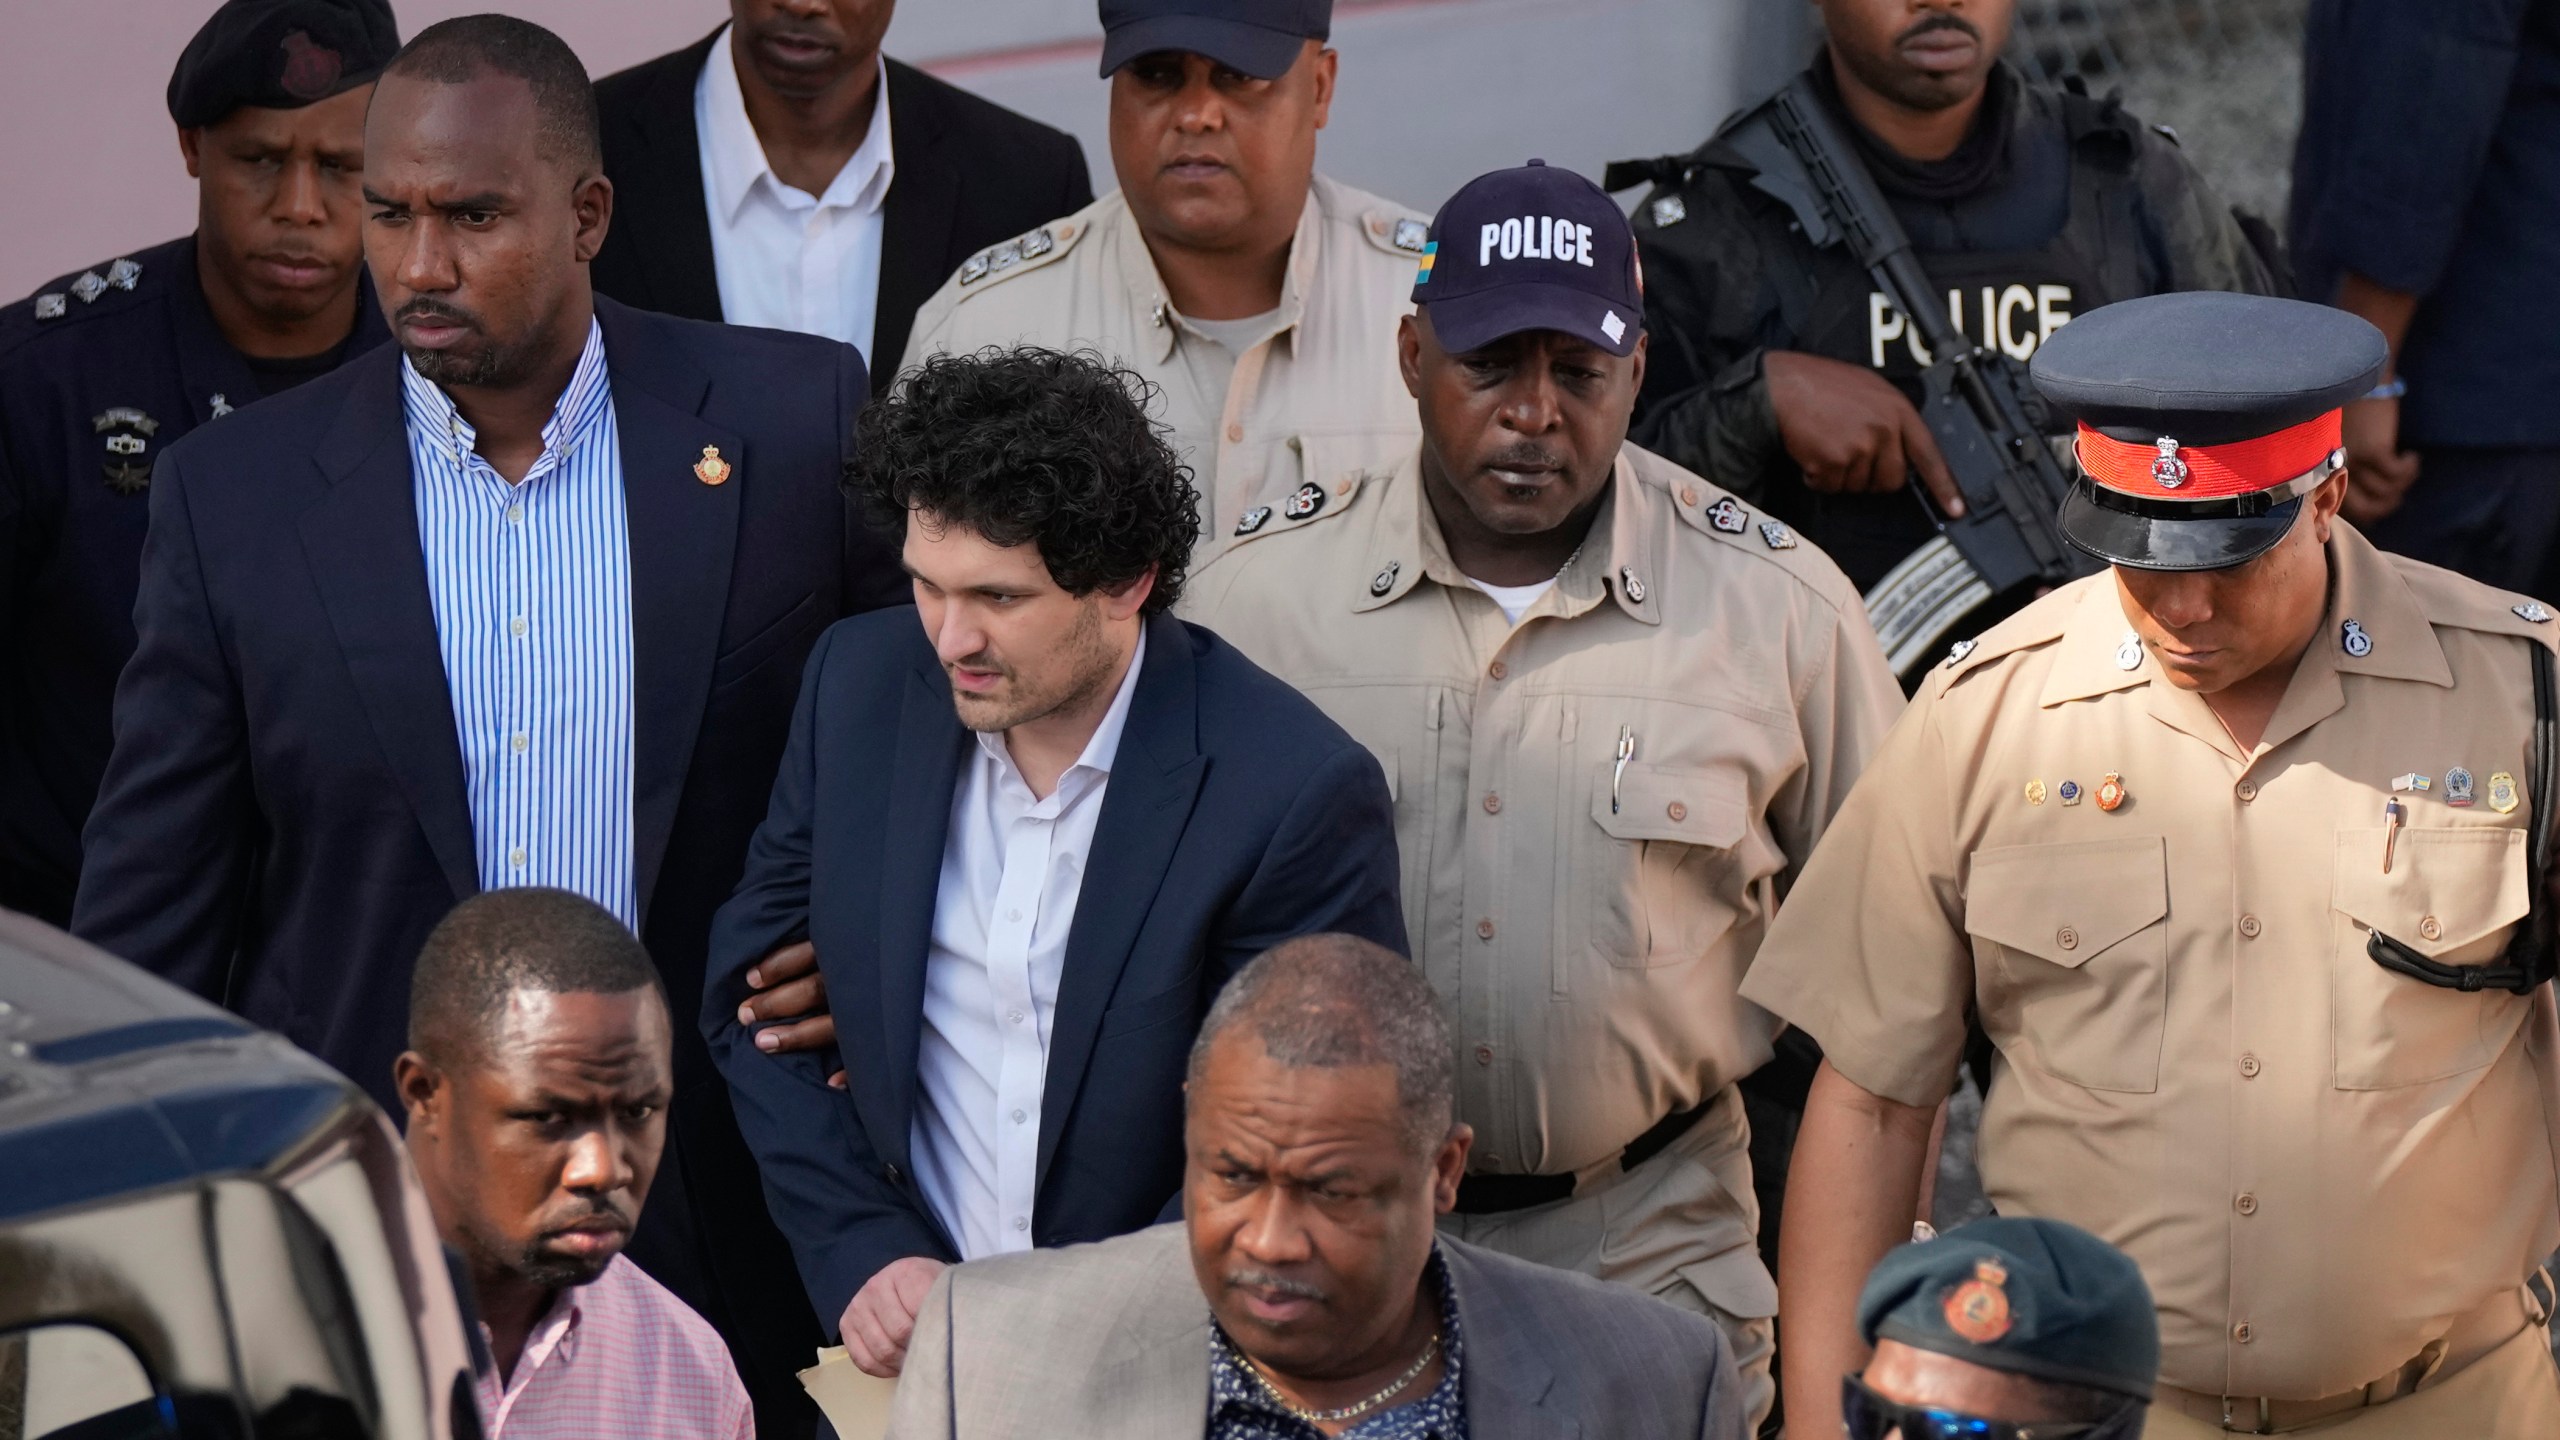 FILE - FTX founder Sam Bankman-Fried, center left, is escorted out of Magistrate Court following a hearing in Nassau, Bahamas, Dec. 19, 2022. Bankman-Fried, charged with a host of financial crimes, was arrested in the Bahamas on Dec. 12, 2022. (AP Photo/Rebecca Blackwell, File)